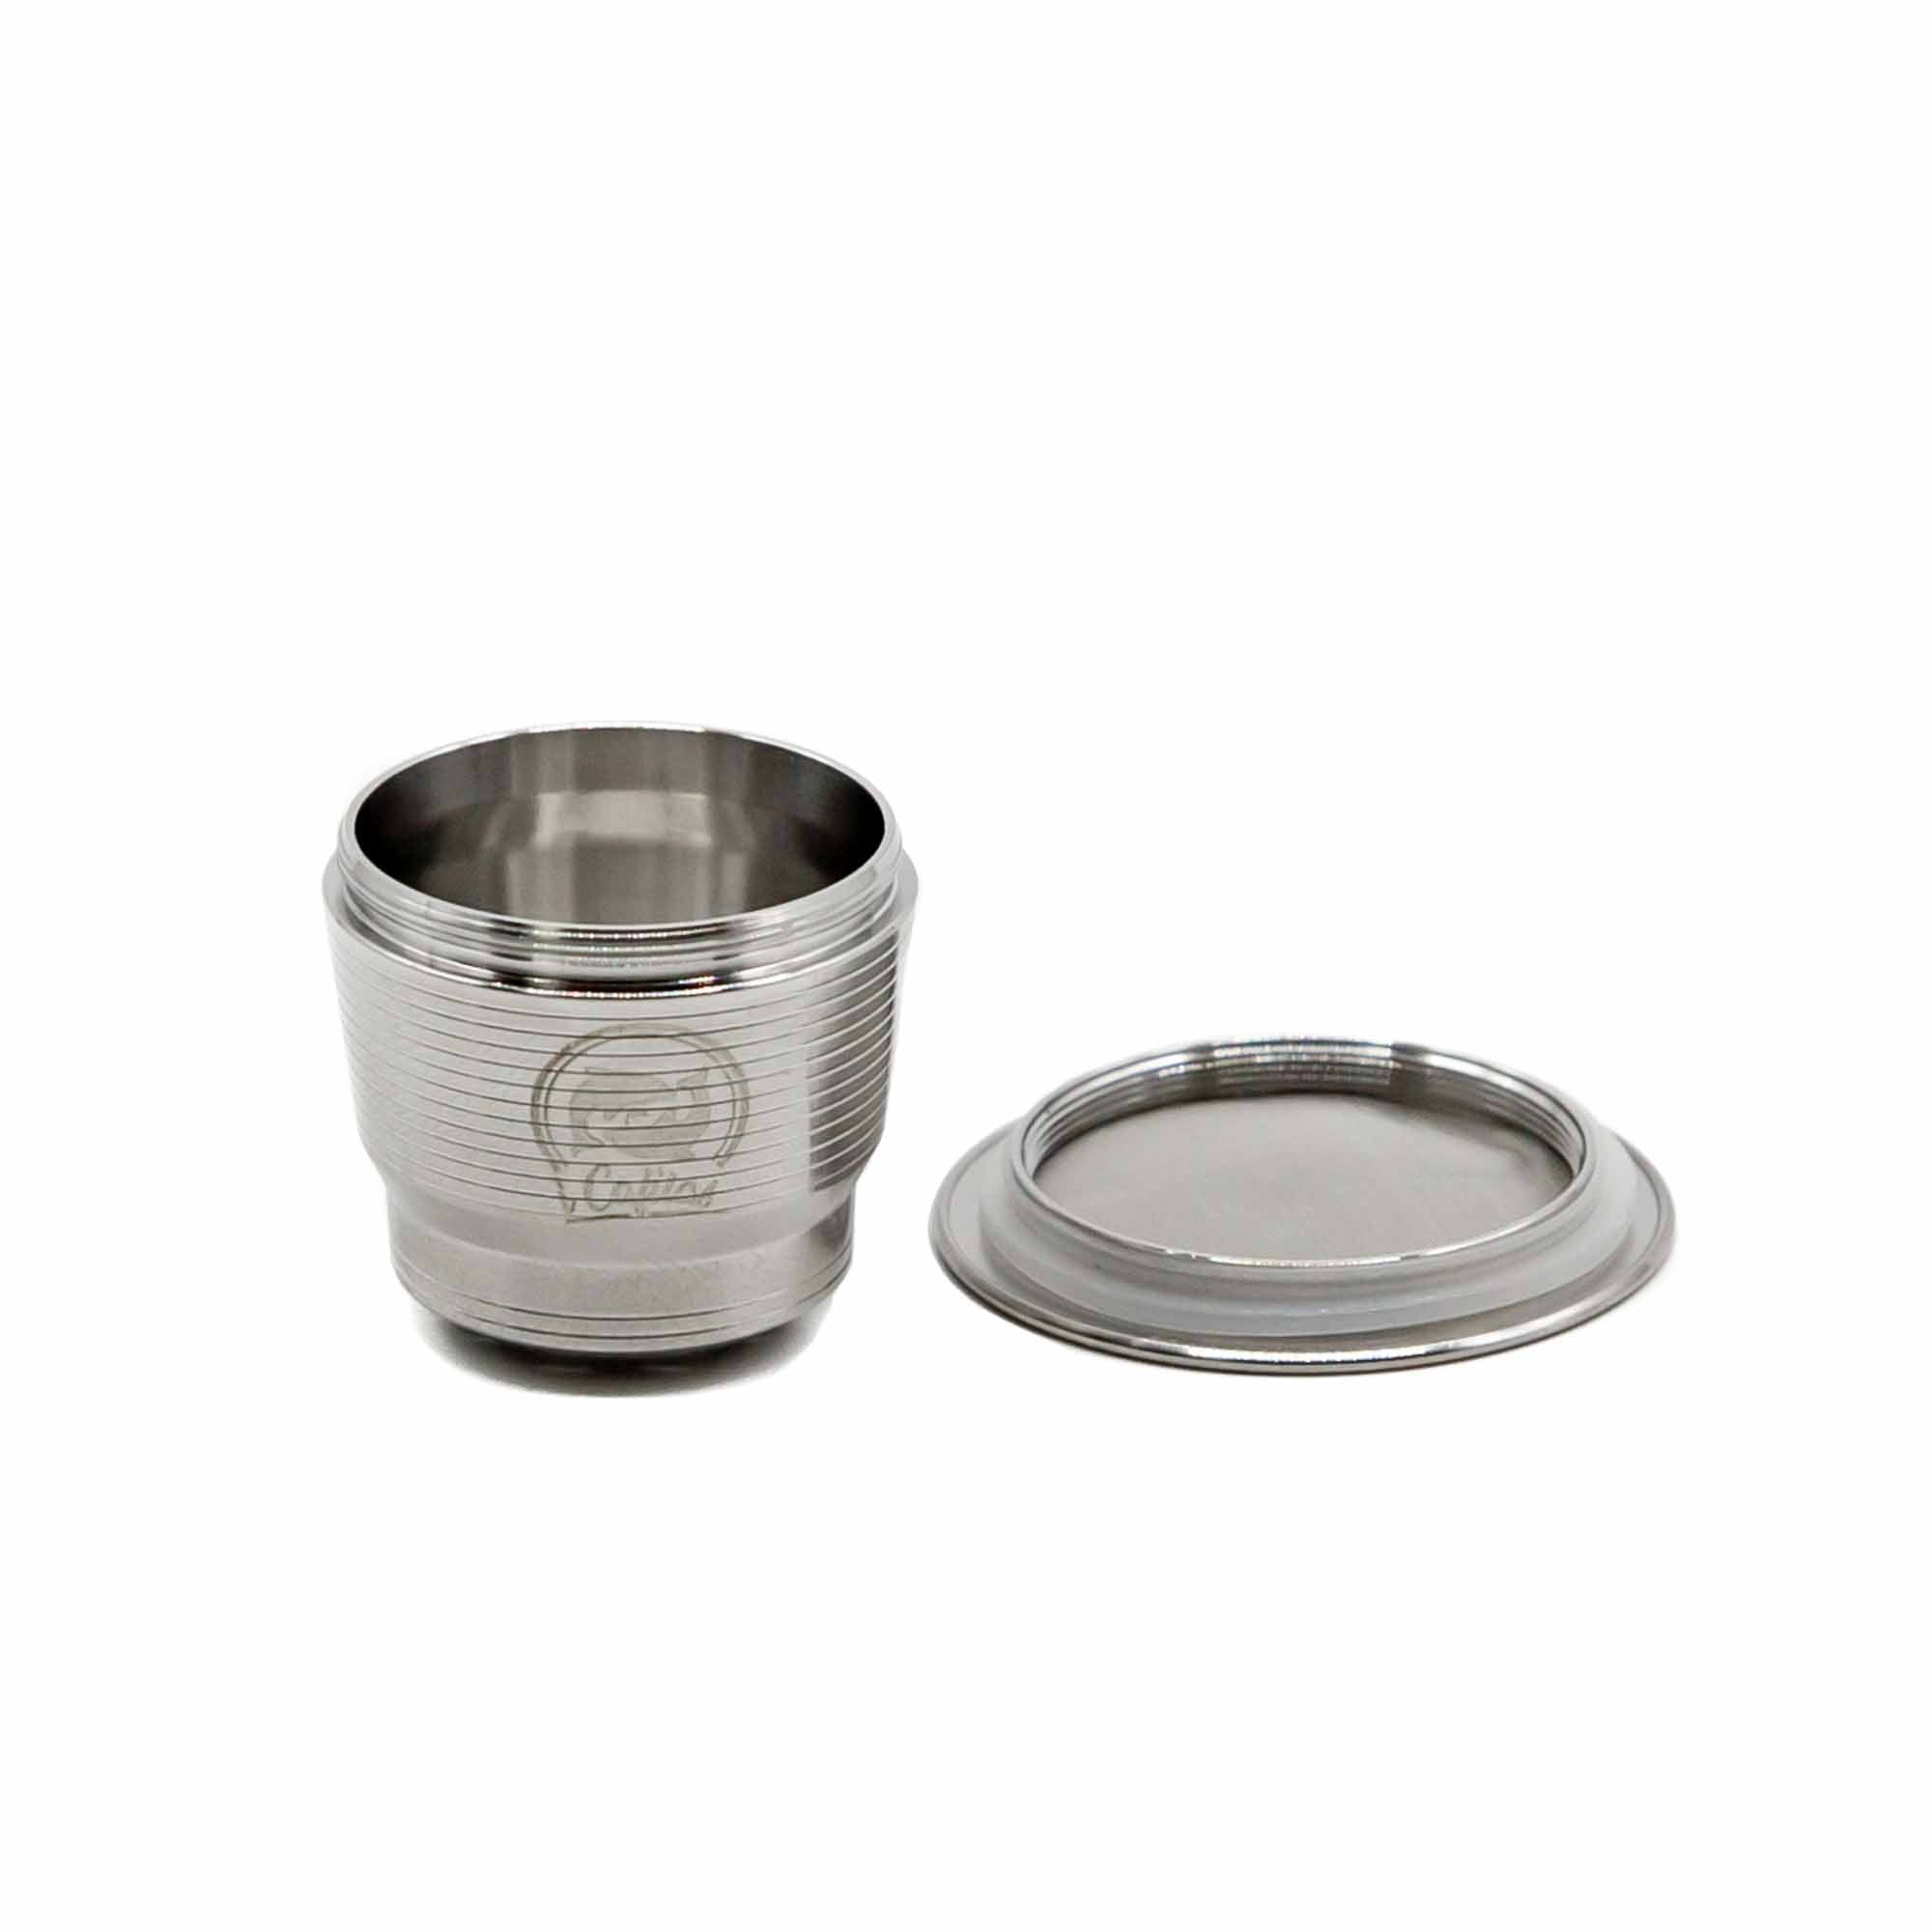 Natural’sace - Nespresso Reusable Stainless Steel Capsule - Mortise And Tenon